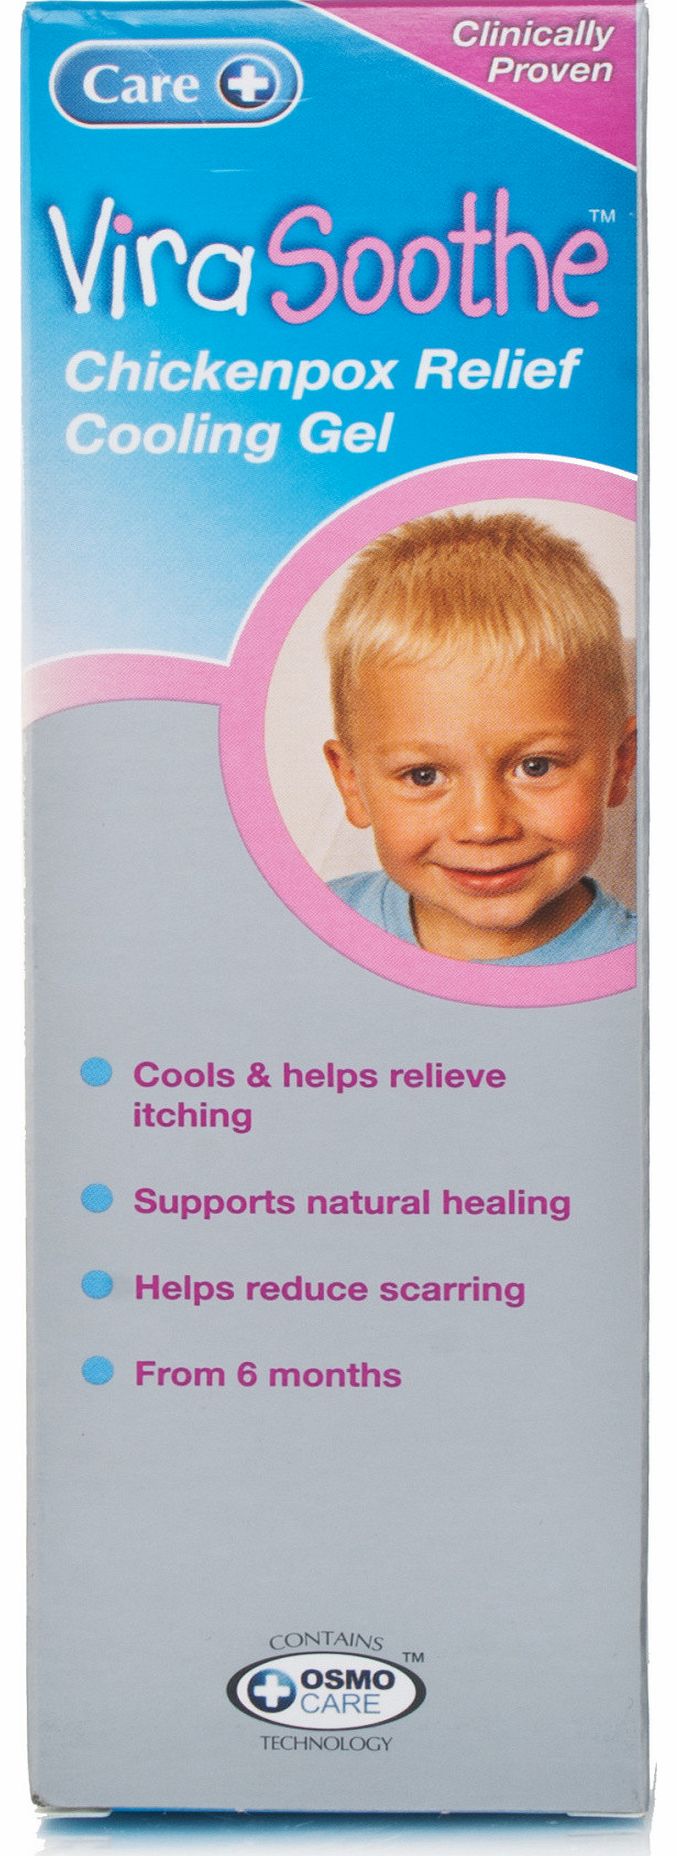 ViraSoothe Cooling Gel for the relief of Chicken